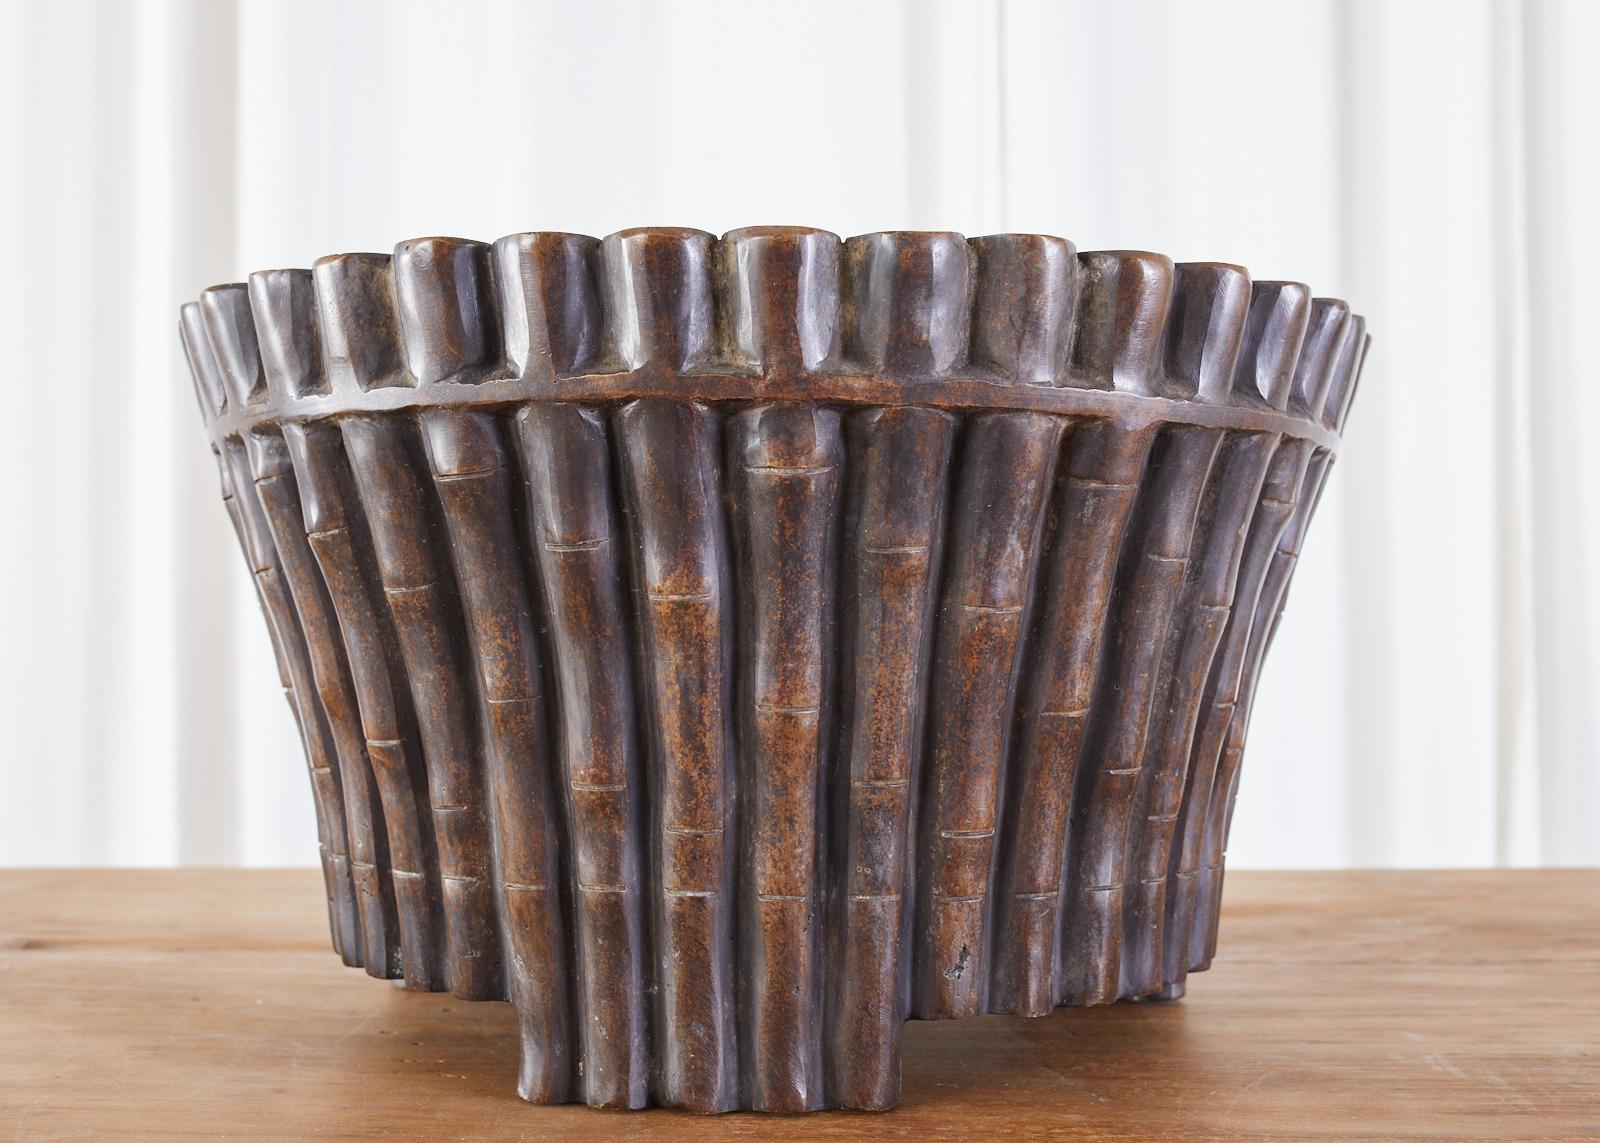 Chinese Bronze Faux Bamboo Garden Jardiniere Planters For Sale